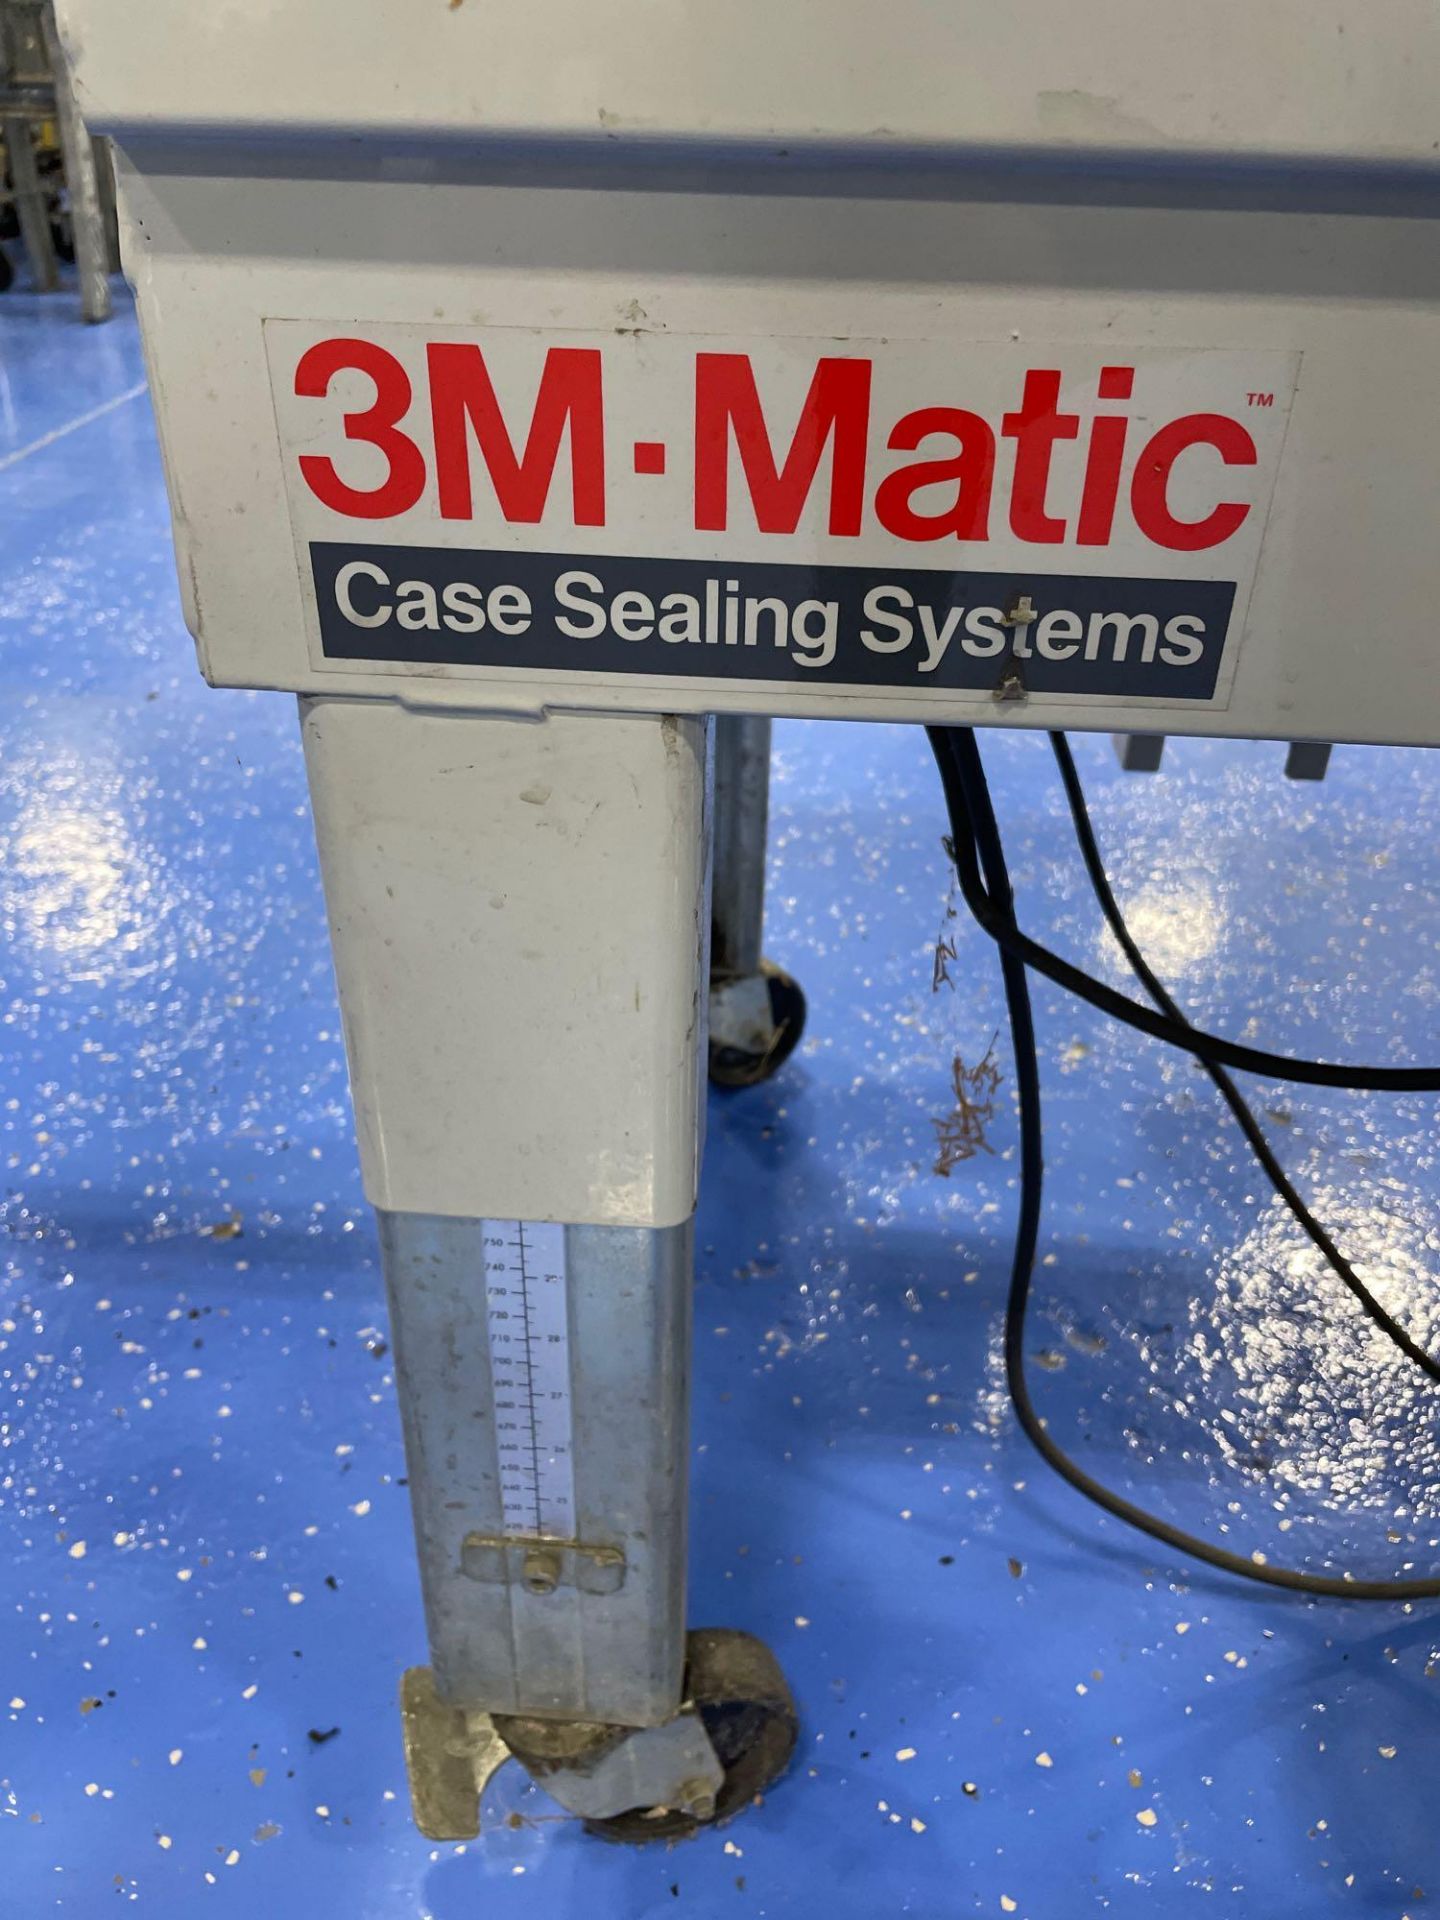 3M Matic 700a Adjustable Top and Bottom Case Sealer - Image 9 of 13